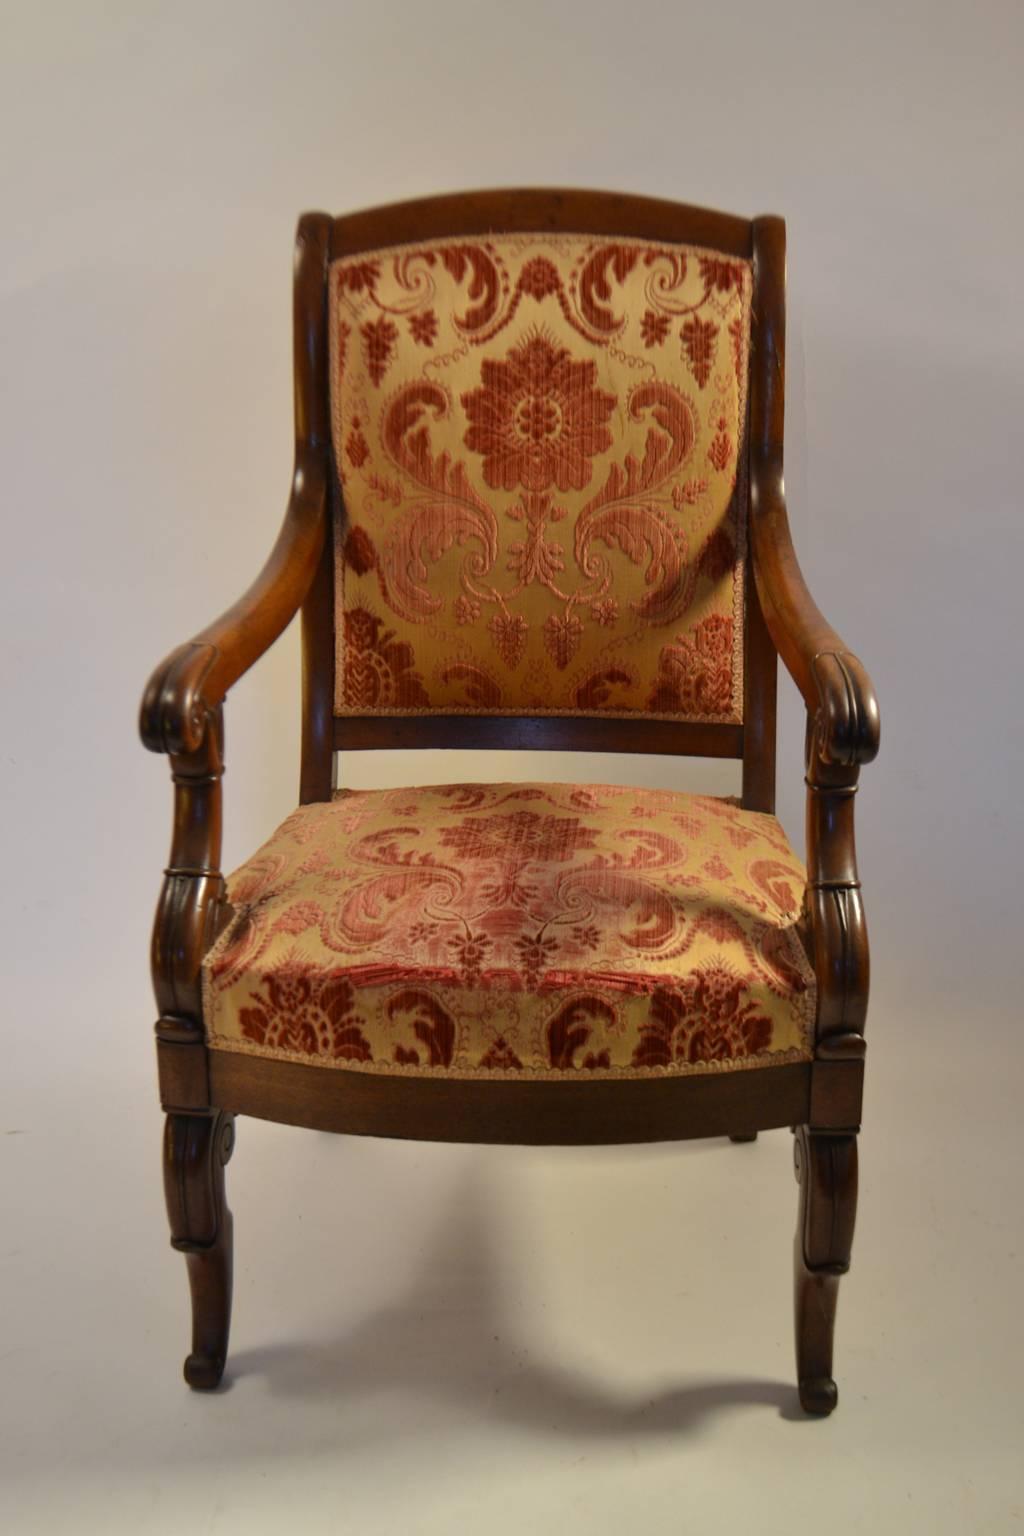 Pair of Louis-Phillippe carved mahogany fauteuils, early 19th century, each with shaped crest, lappet carved arms, rounded seat rail, lappet scrolled legs.